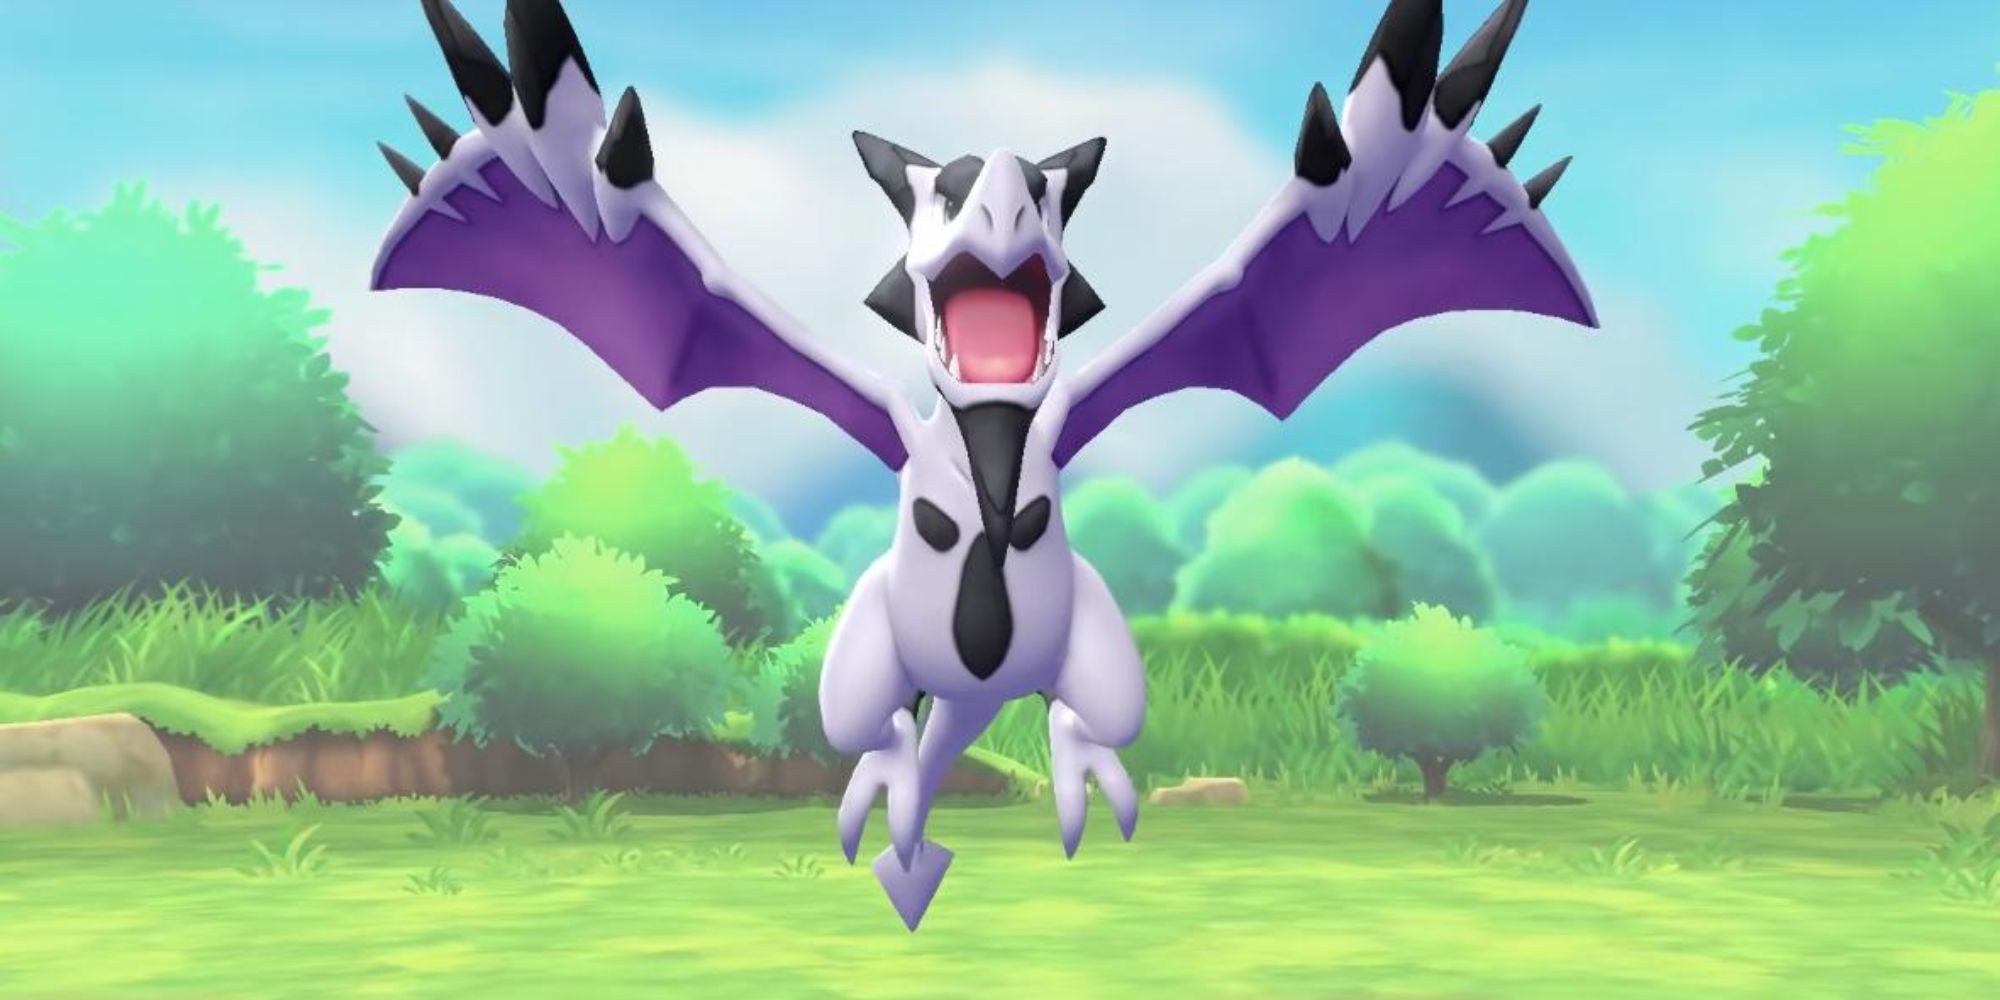 Mega Aerodactyl hovers over a field with its wings outstretched.